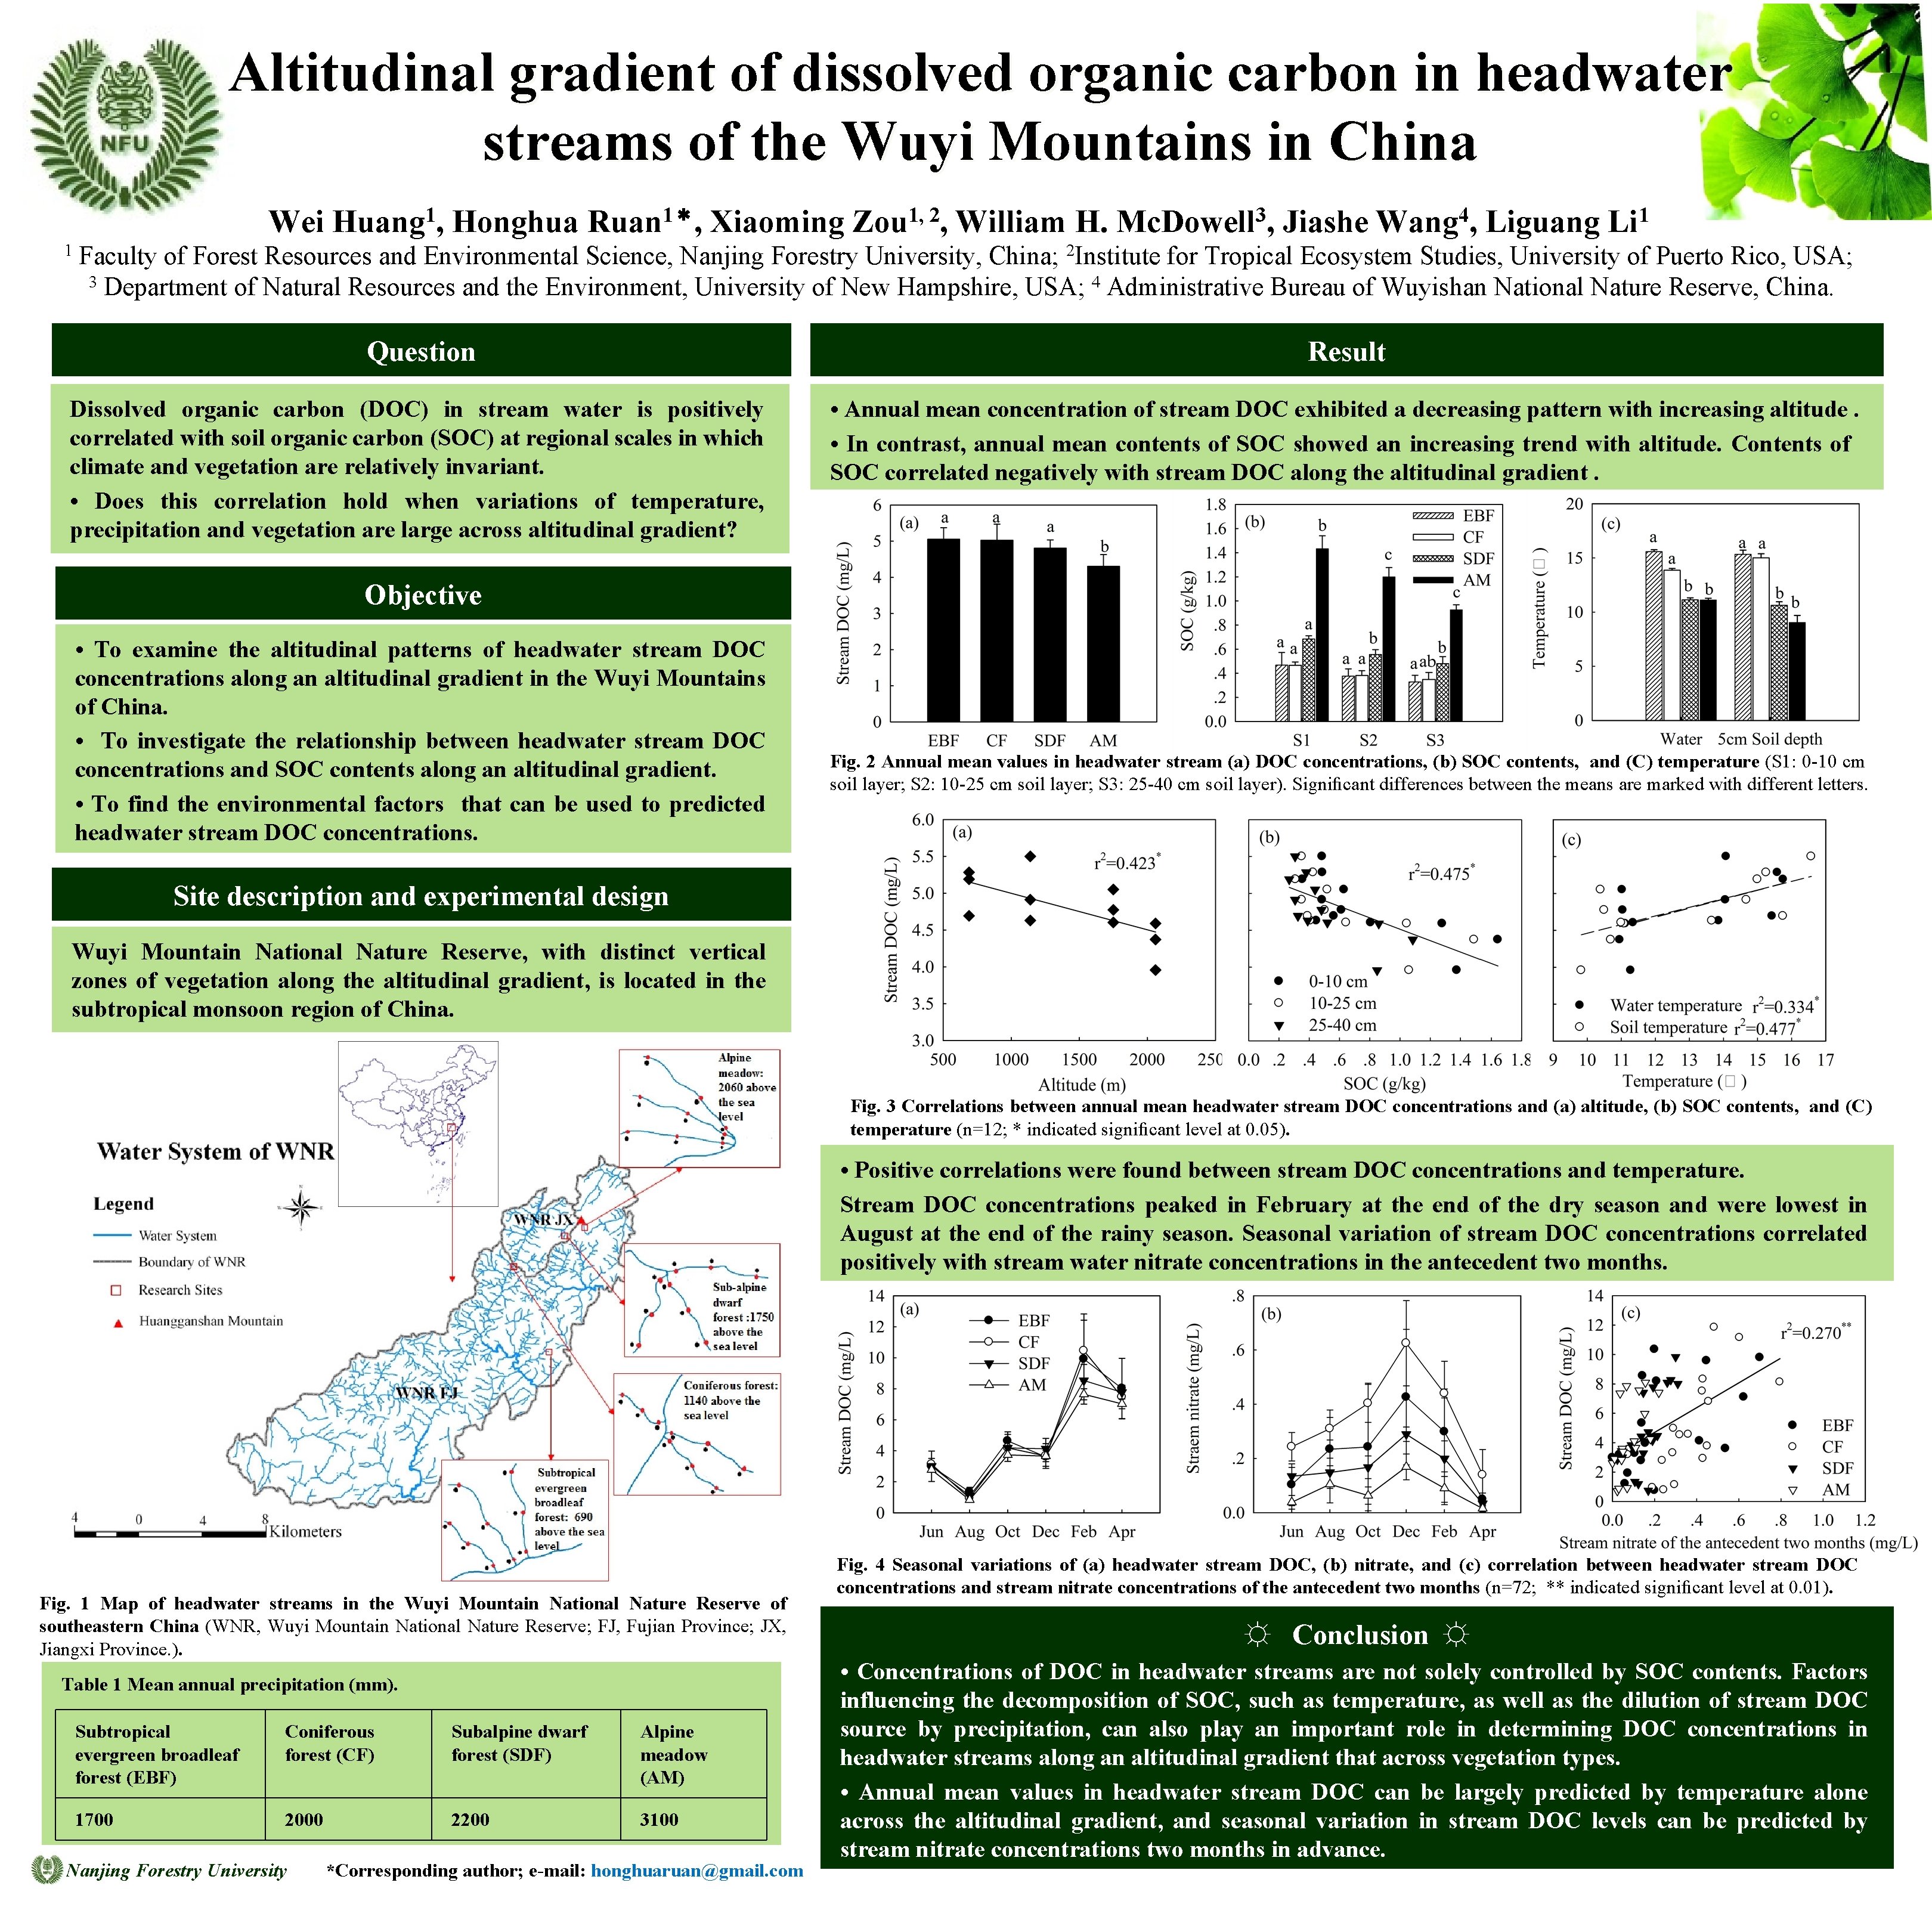 Altitudinal gradient of dissolved organic carbon in headwater streams of the Wuyi Mountains in